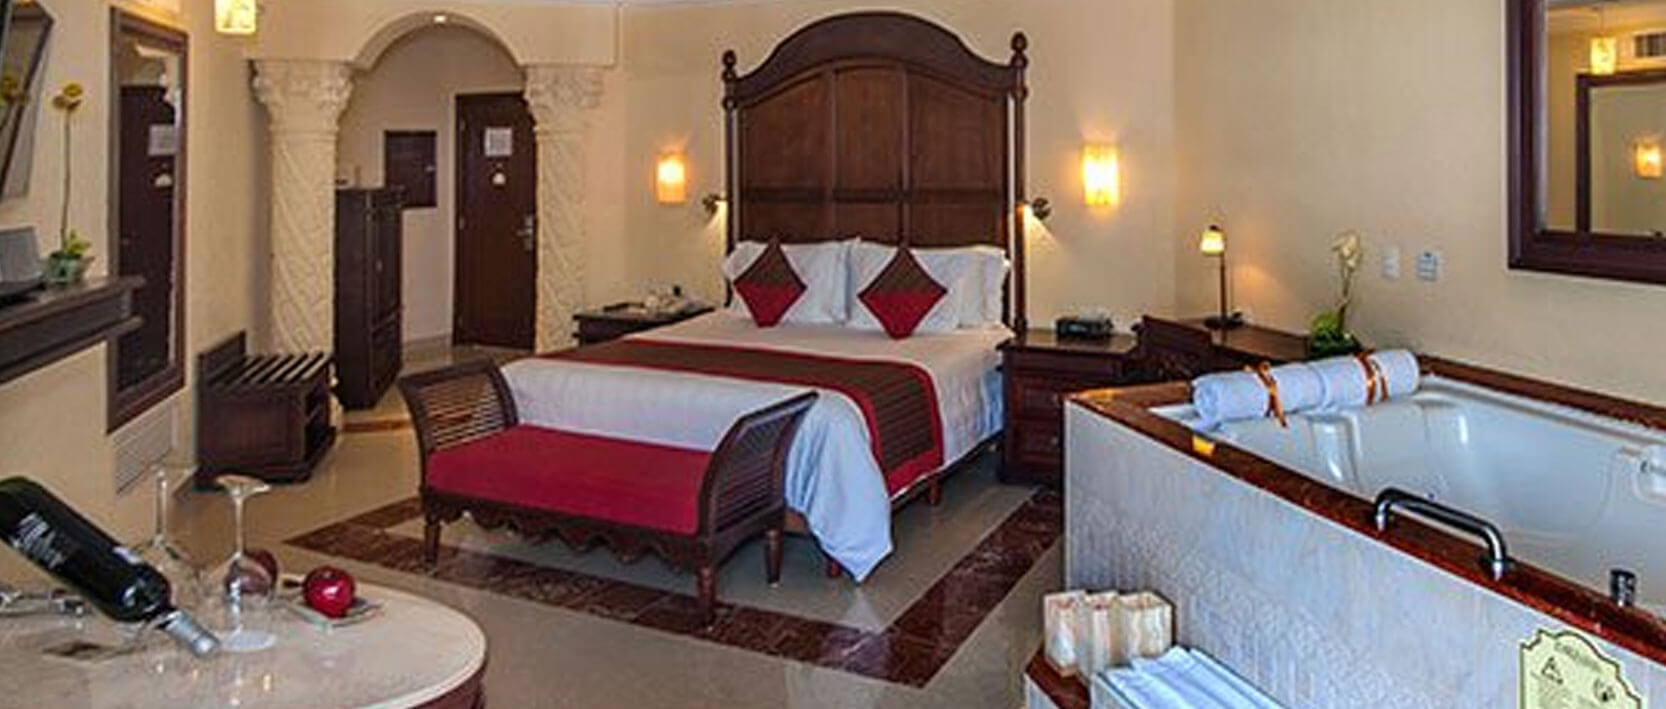 The Royal Playa Del Carmen Accommodations - Royal Junior Suite Beachfront Walk-Out